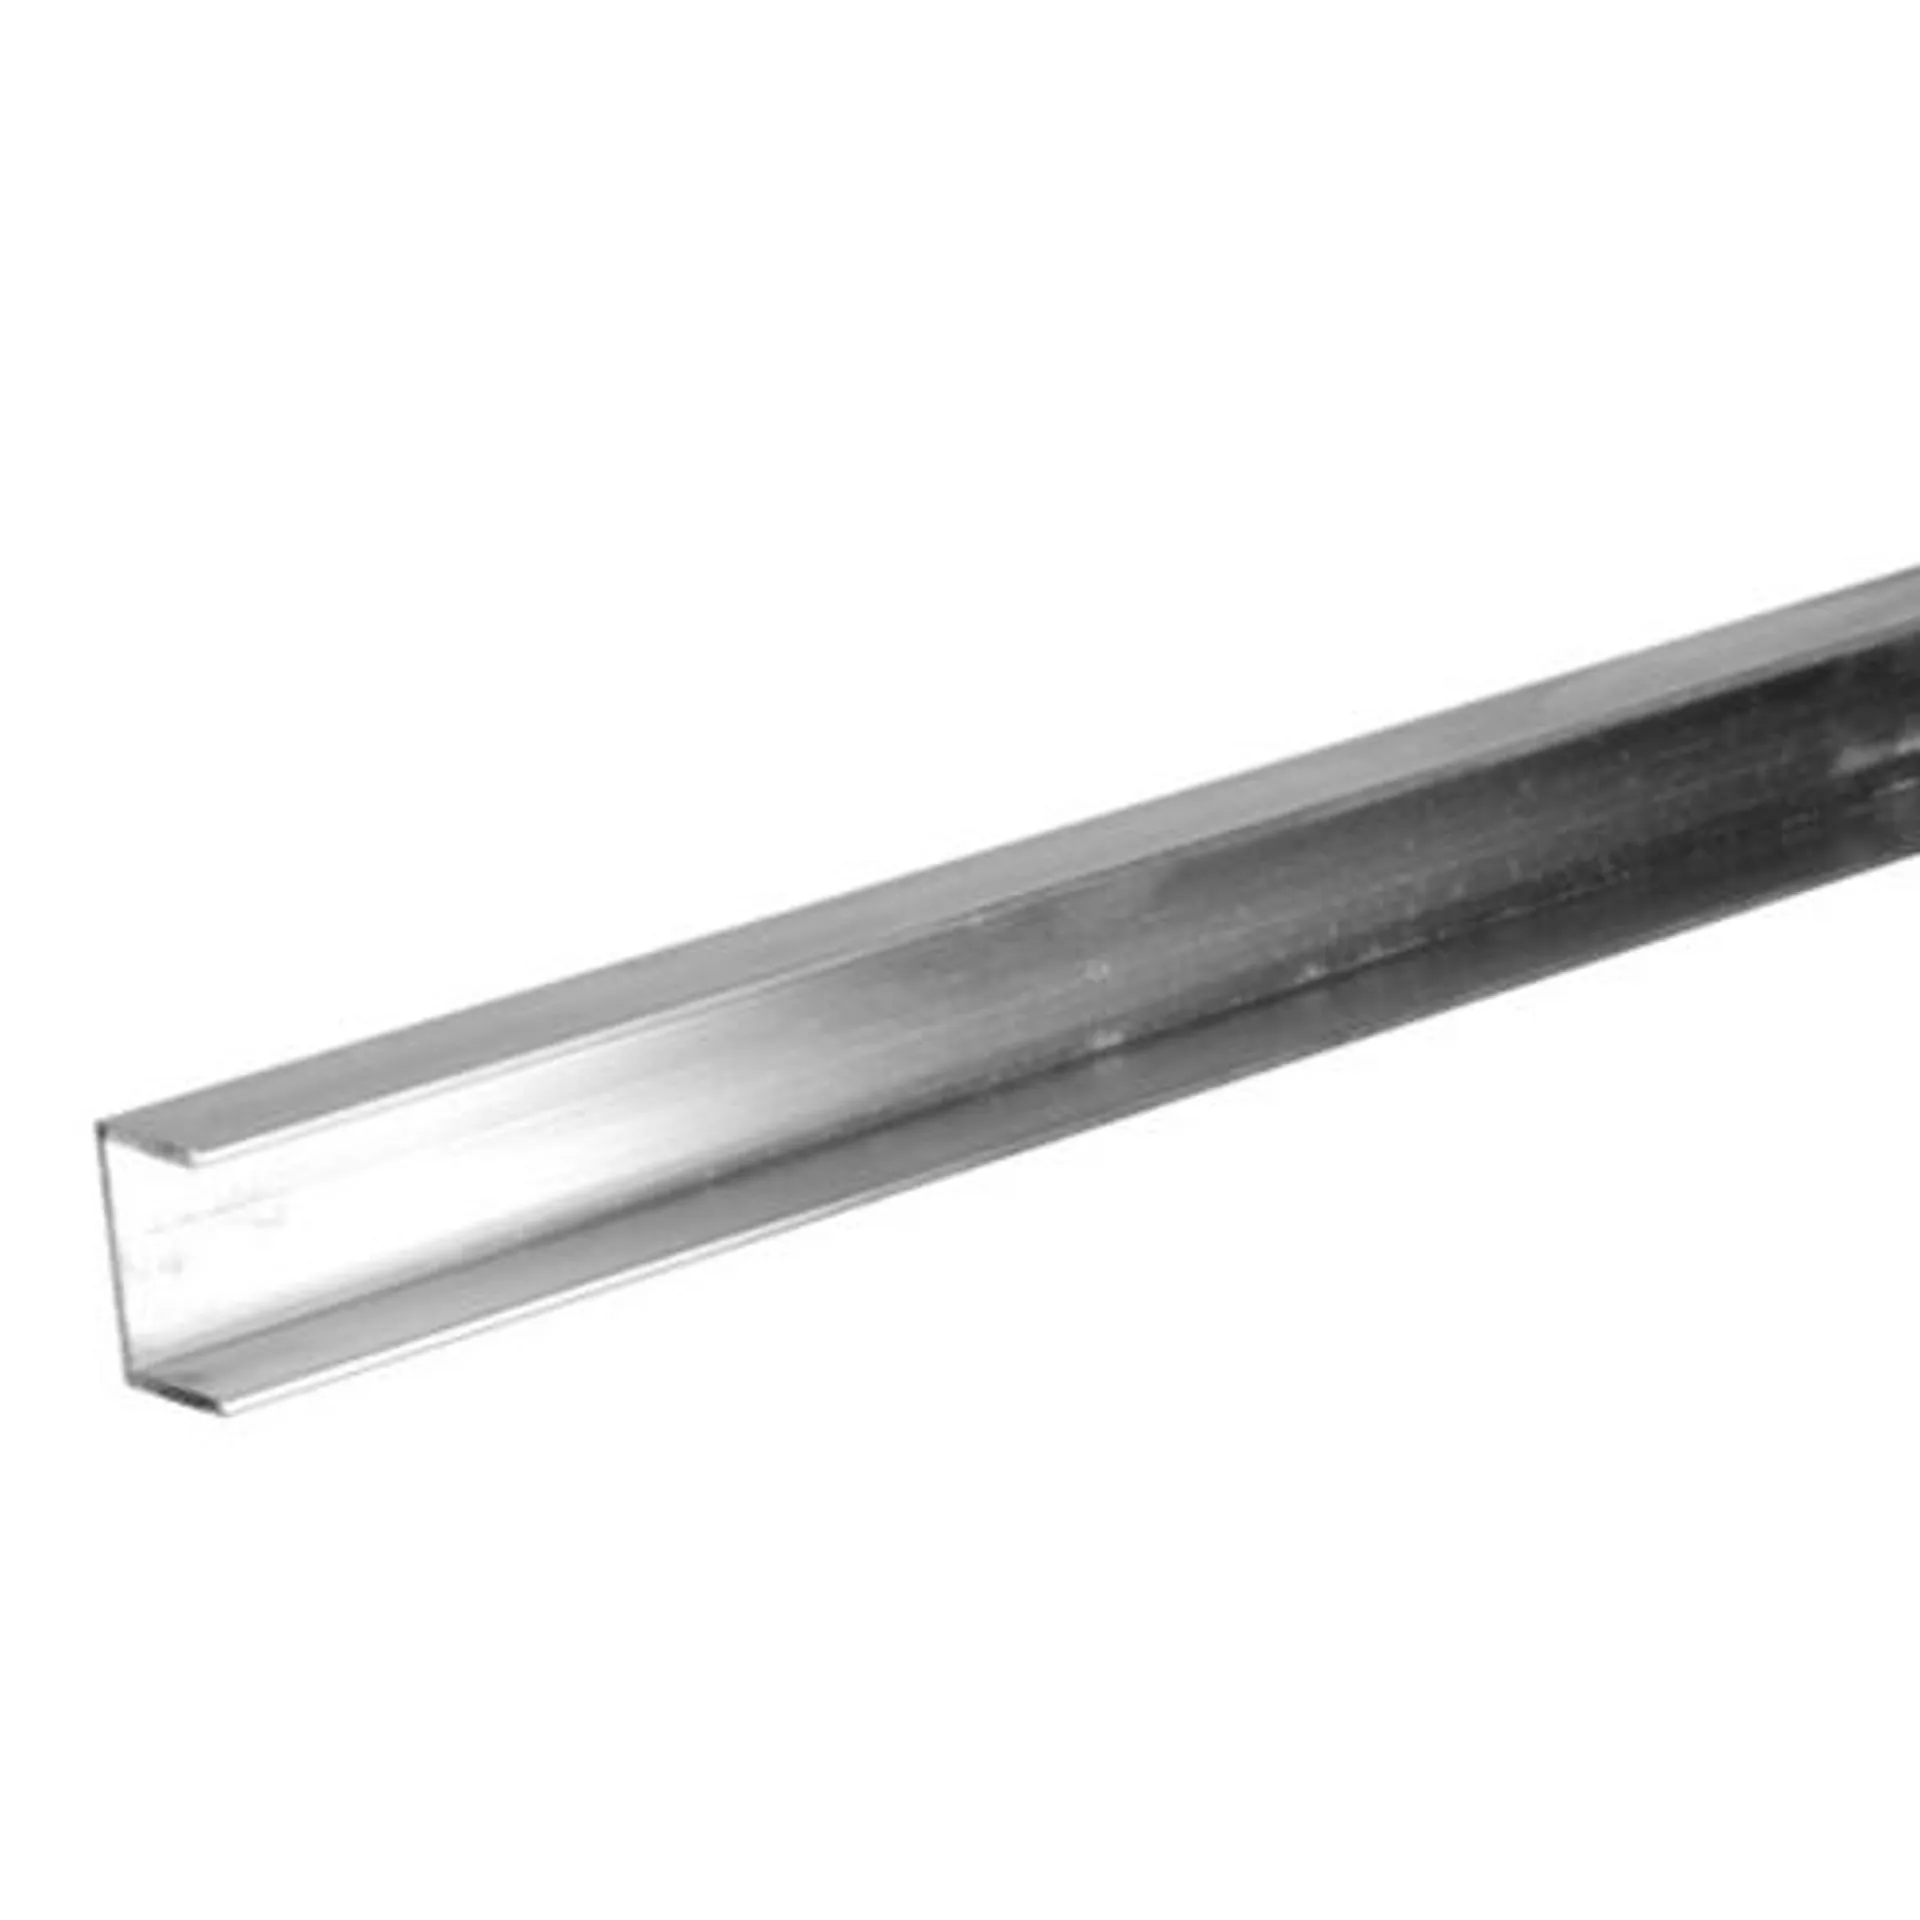 SteelWorks Aluminum Plywood Trim Channel